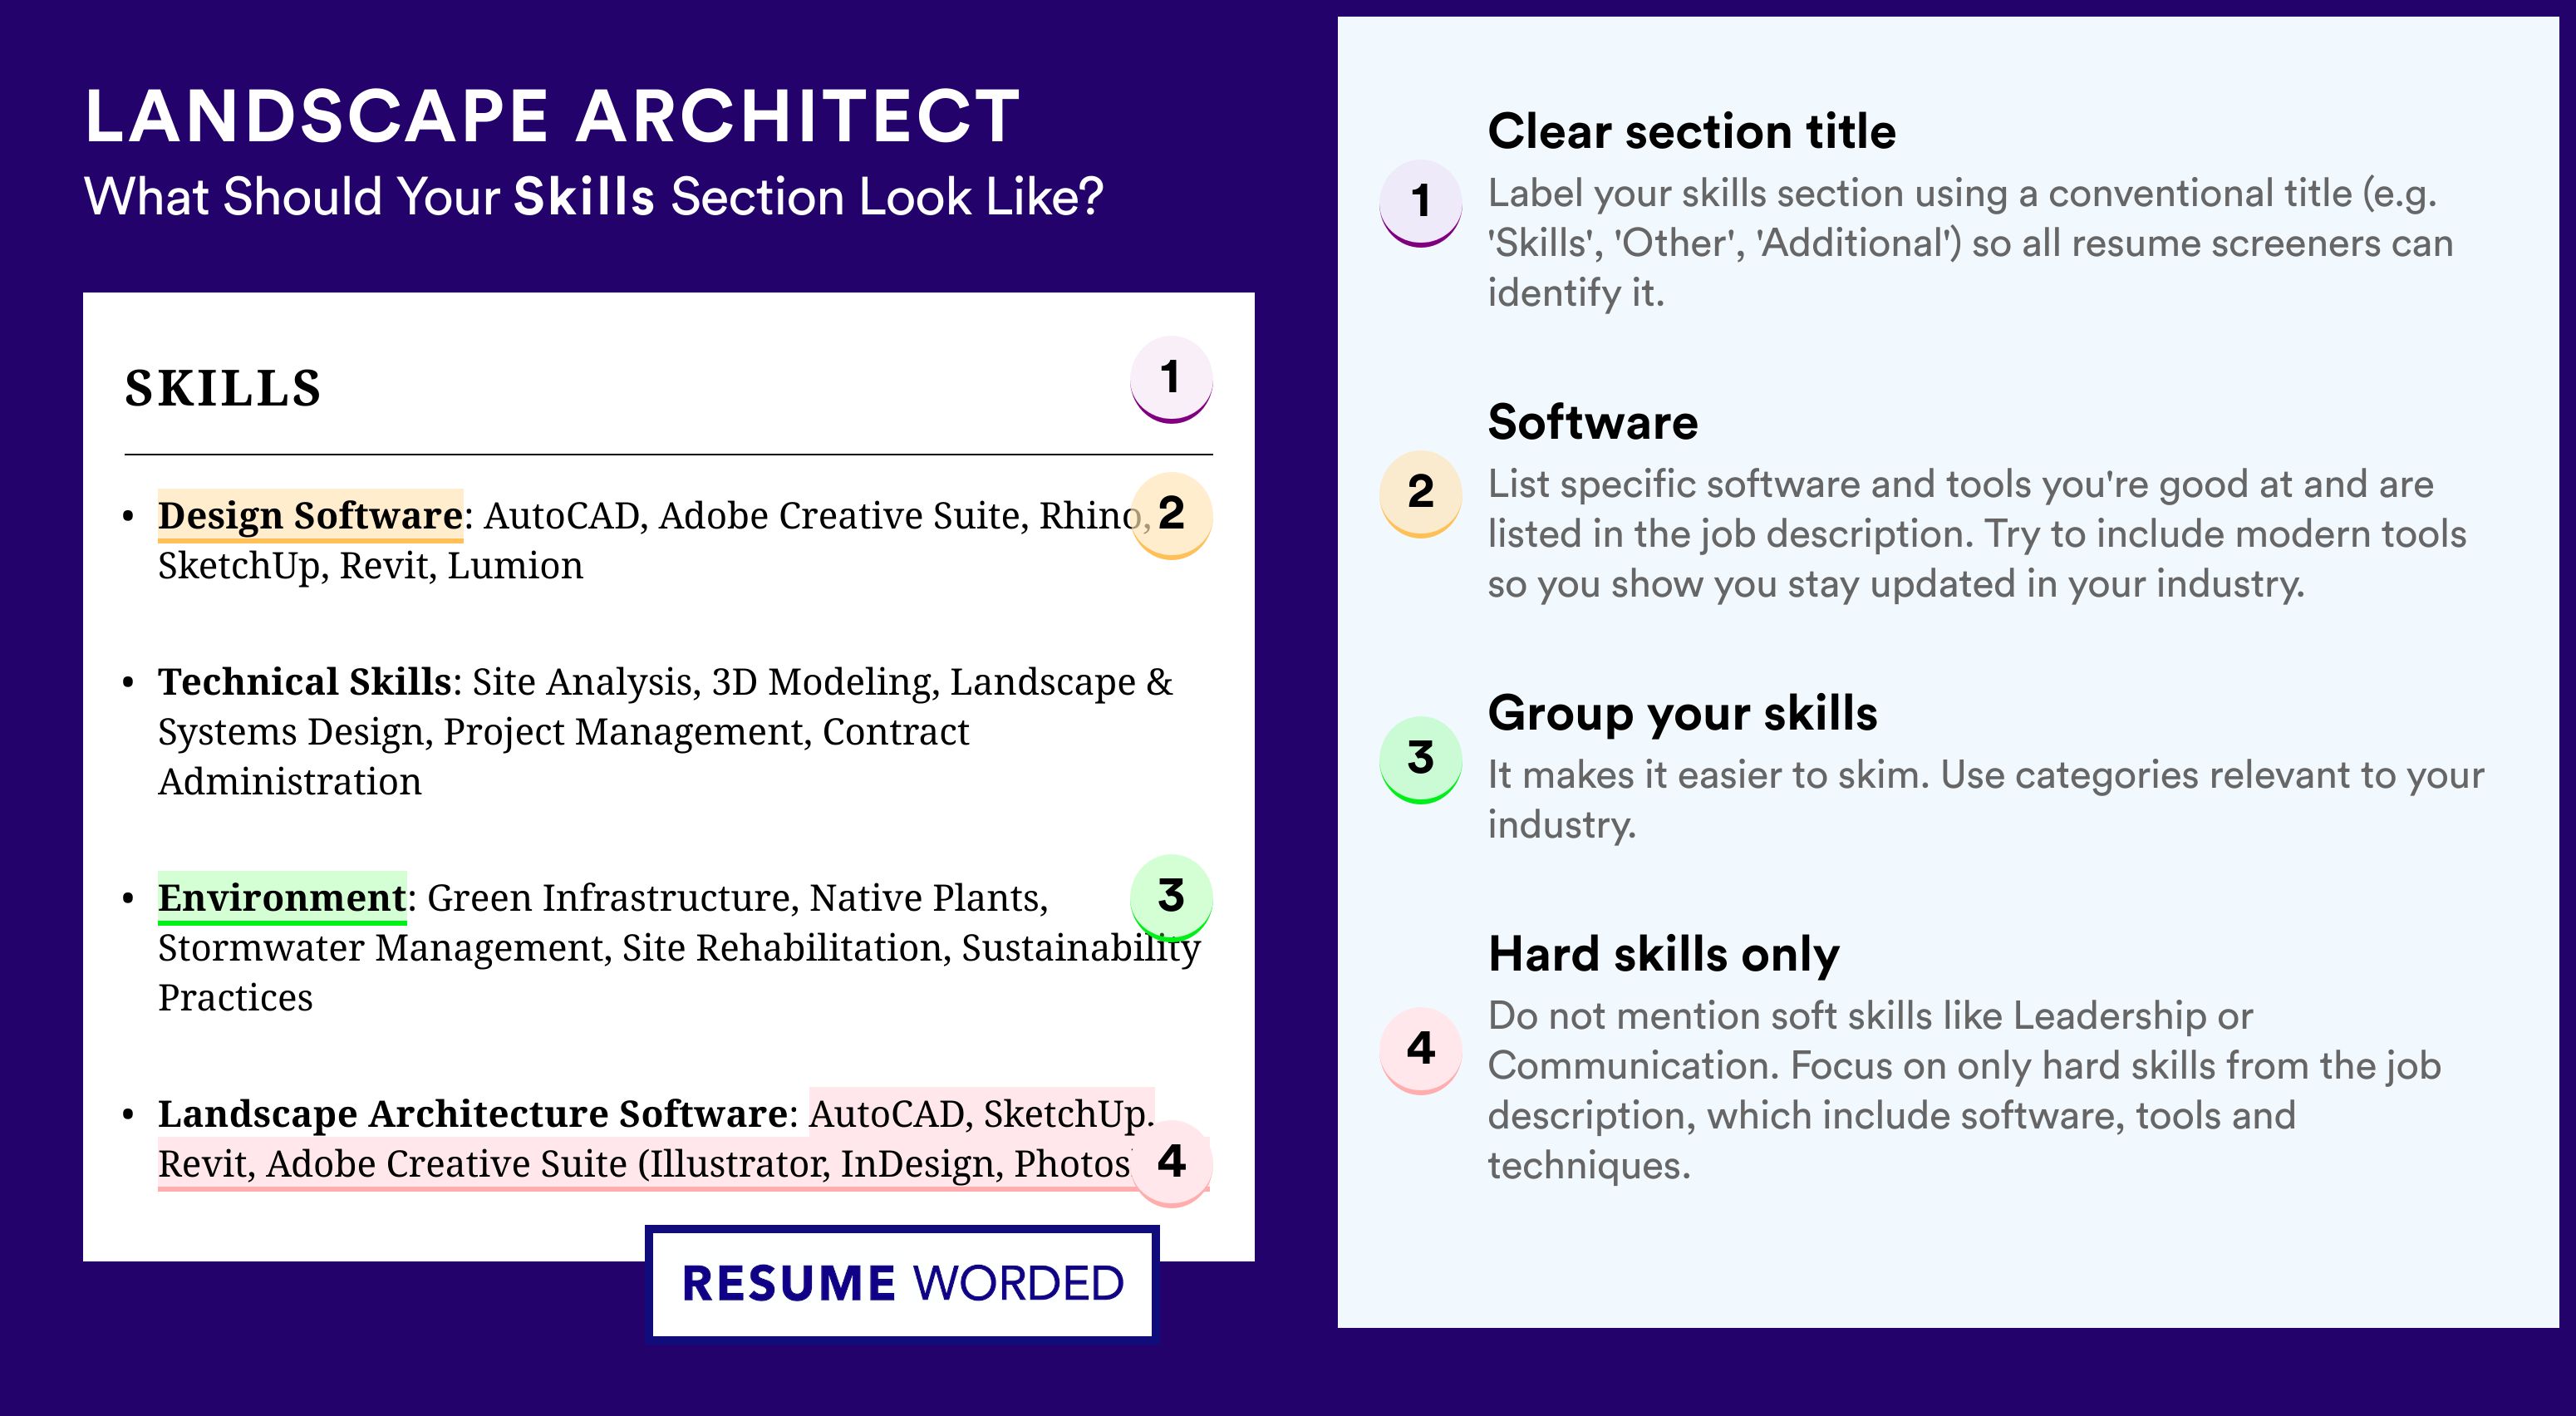 How To Write Your Skills Section - Landscape Architect Roles